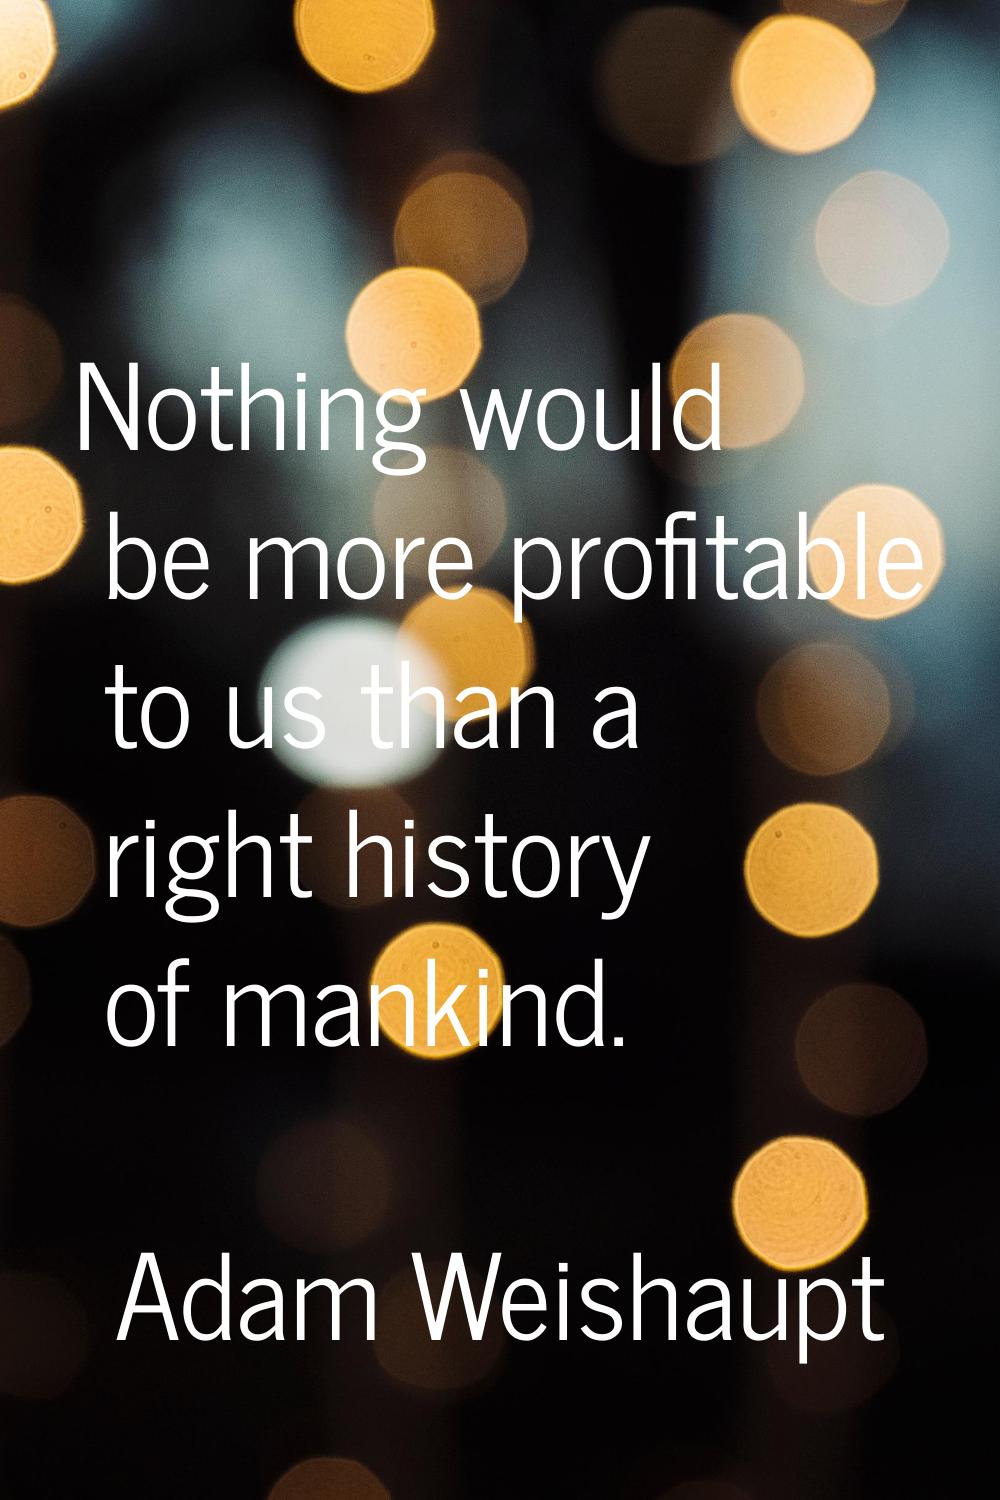 Nothing would be more profitable to us than a right history of mankind.